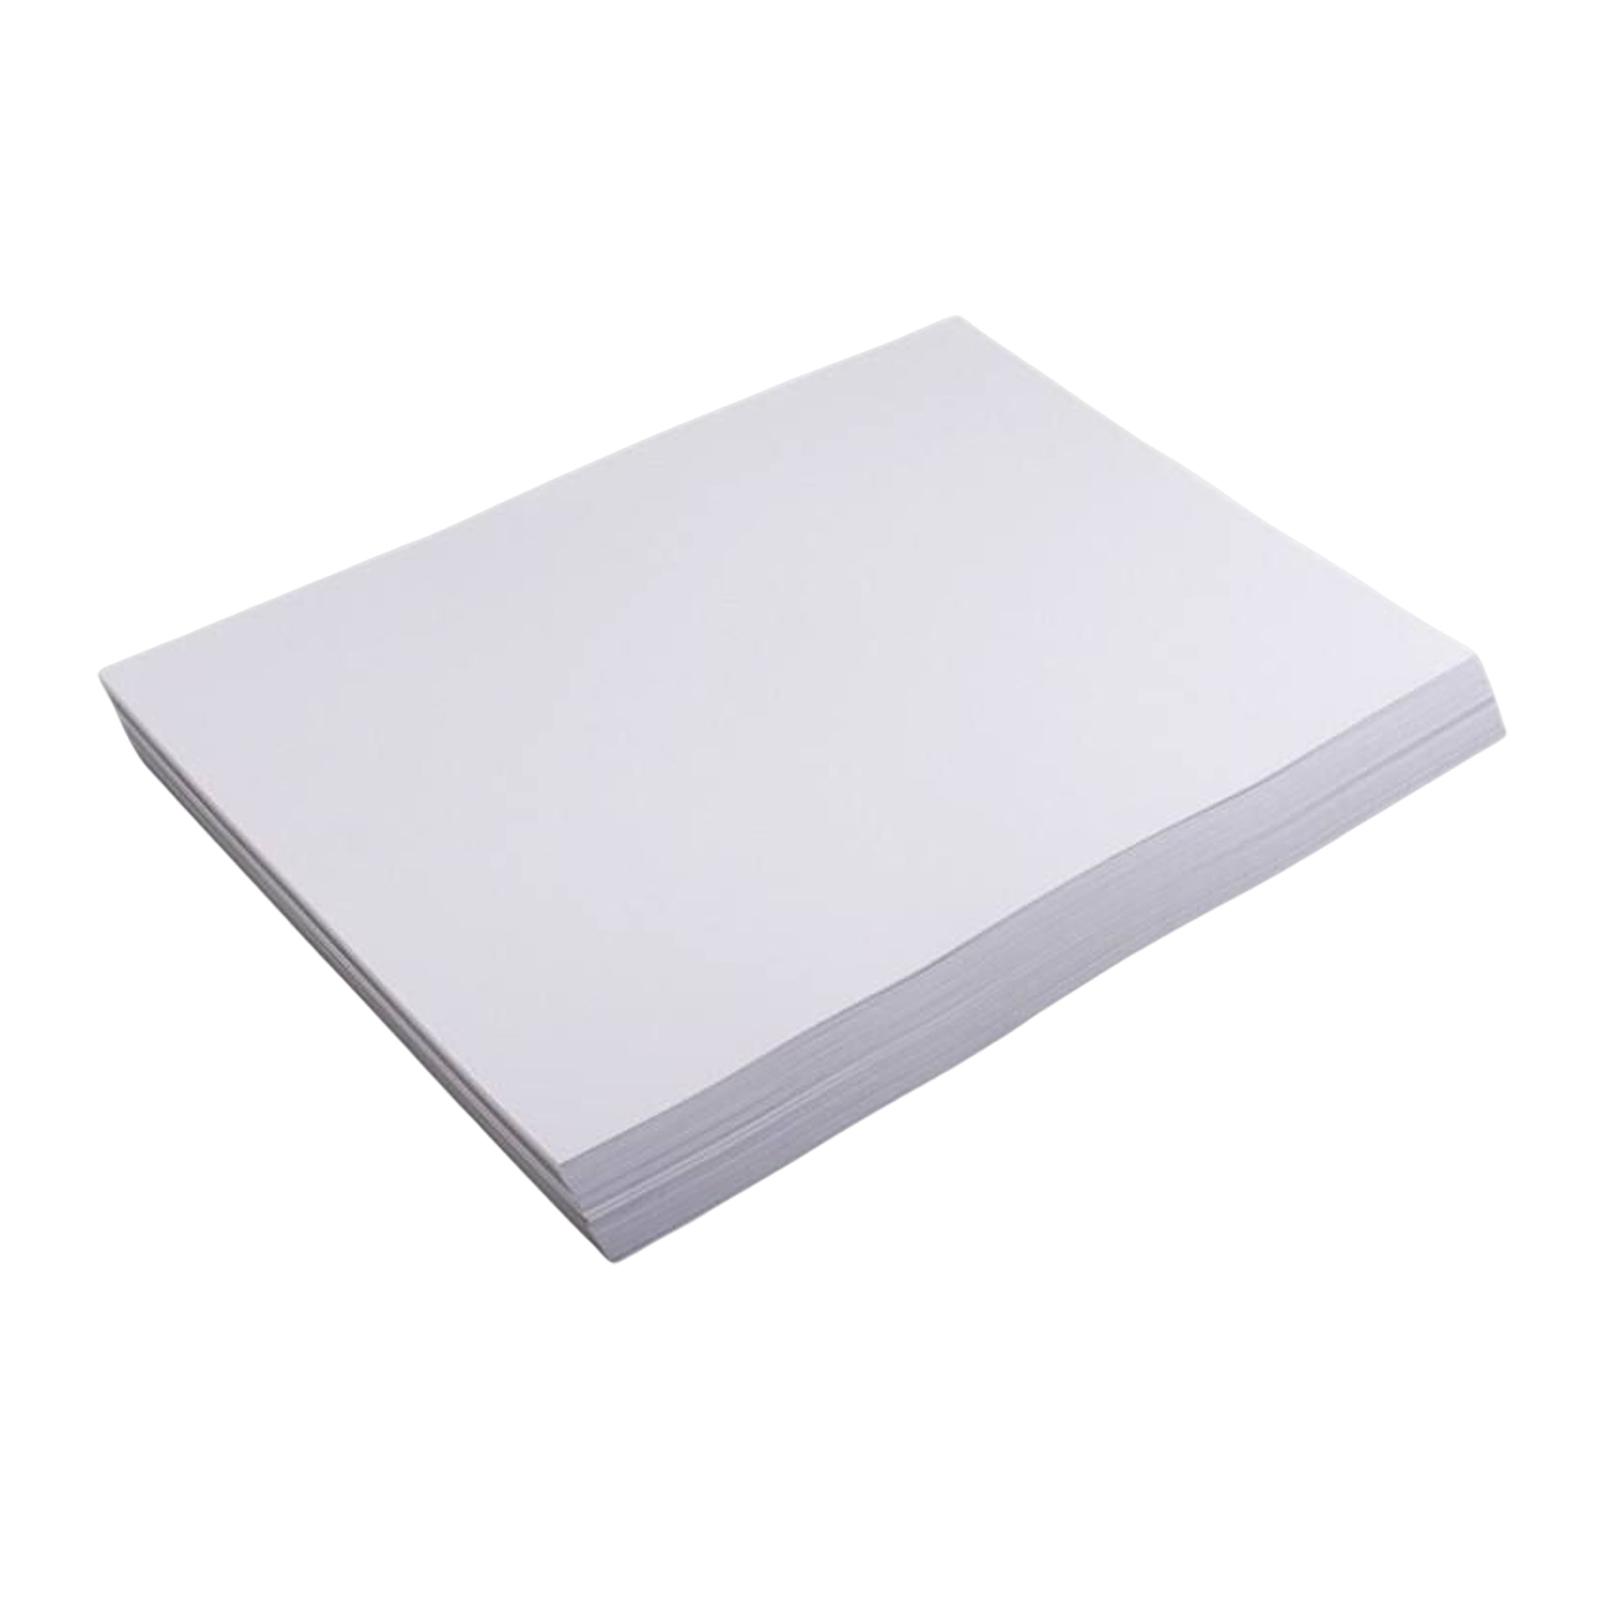 20 Sheets Sulphite Drawing Paper Sketch Paper Blank White Tracing Paper Cold Press Paper for Artists Beginner Child Supplies, Size: A3